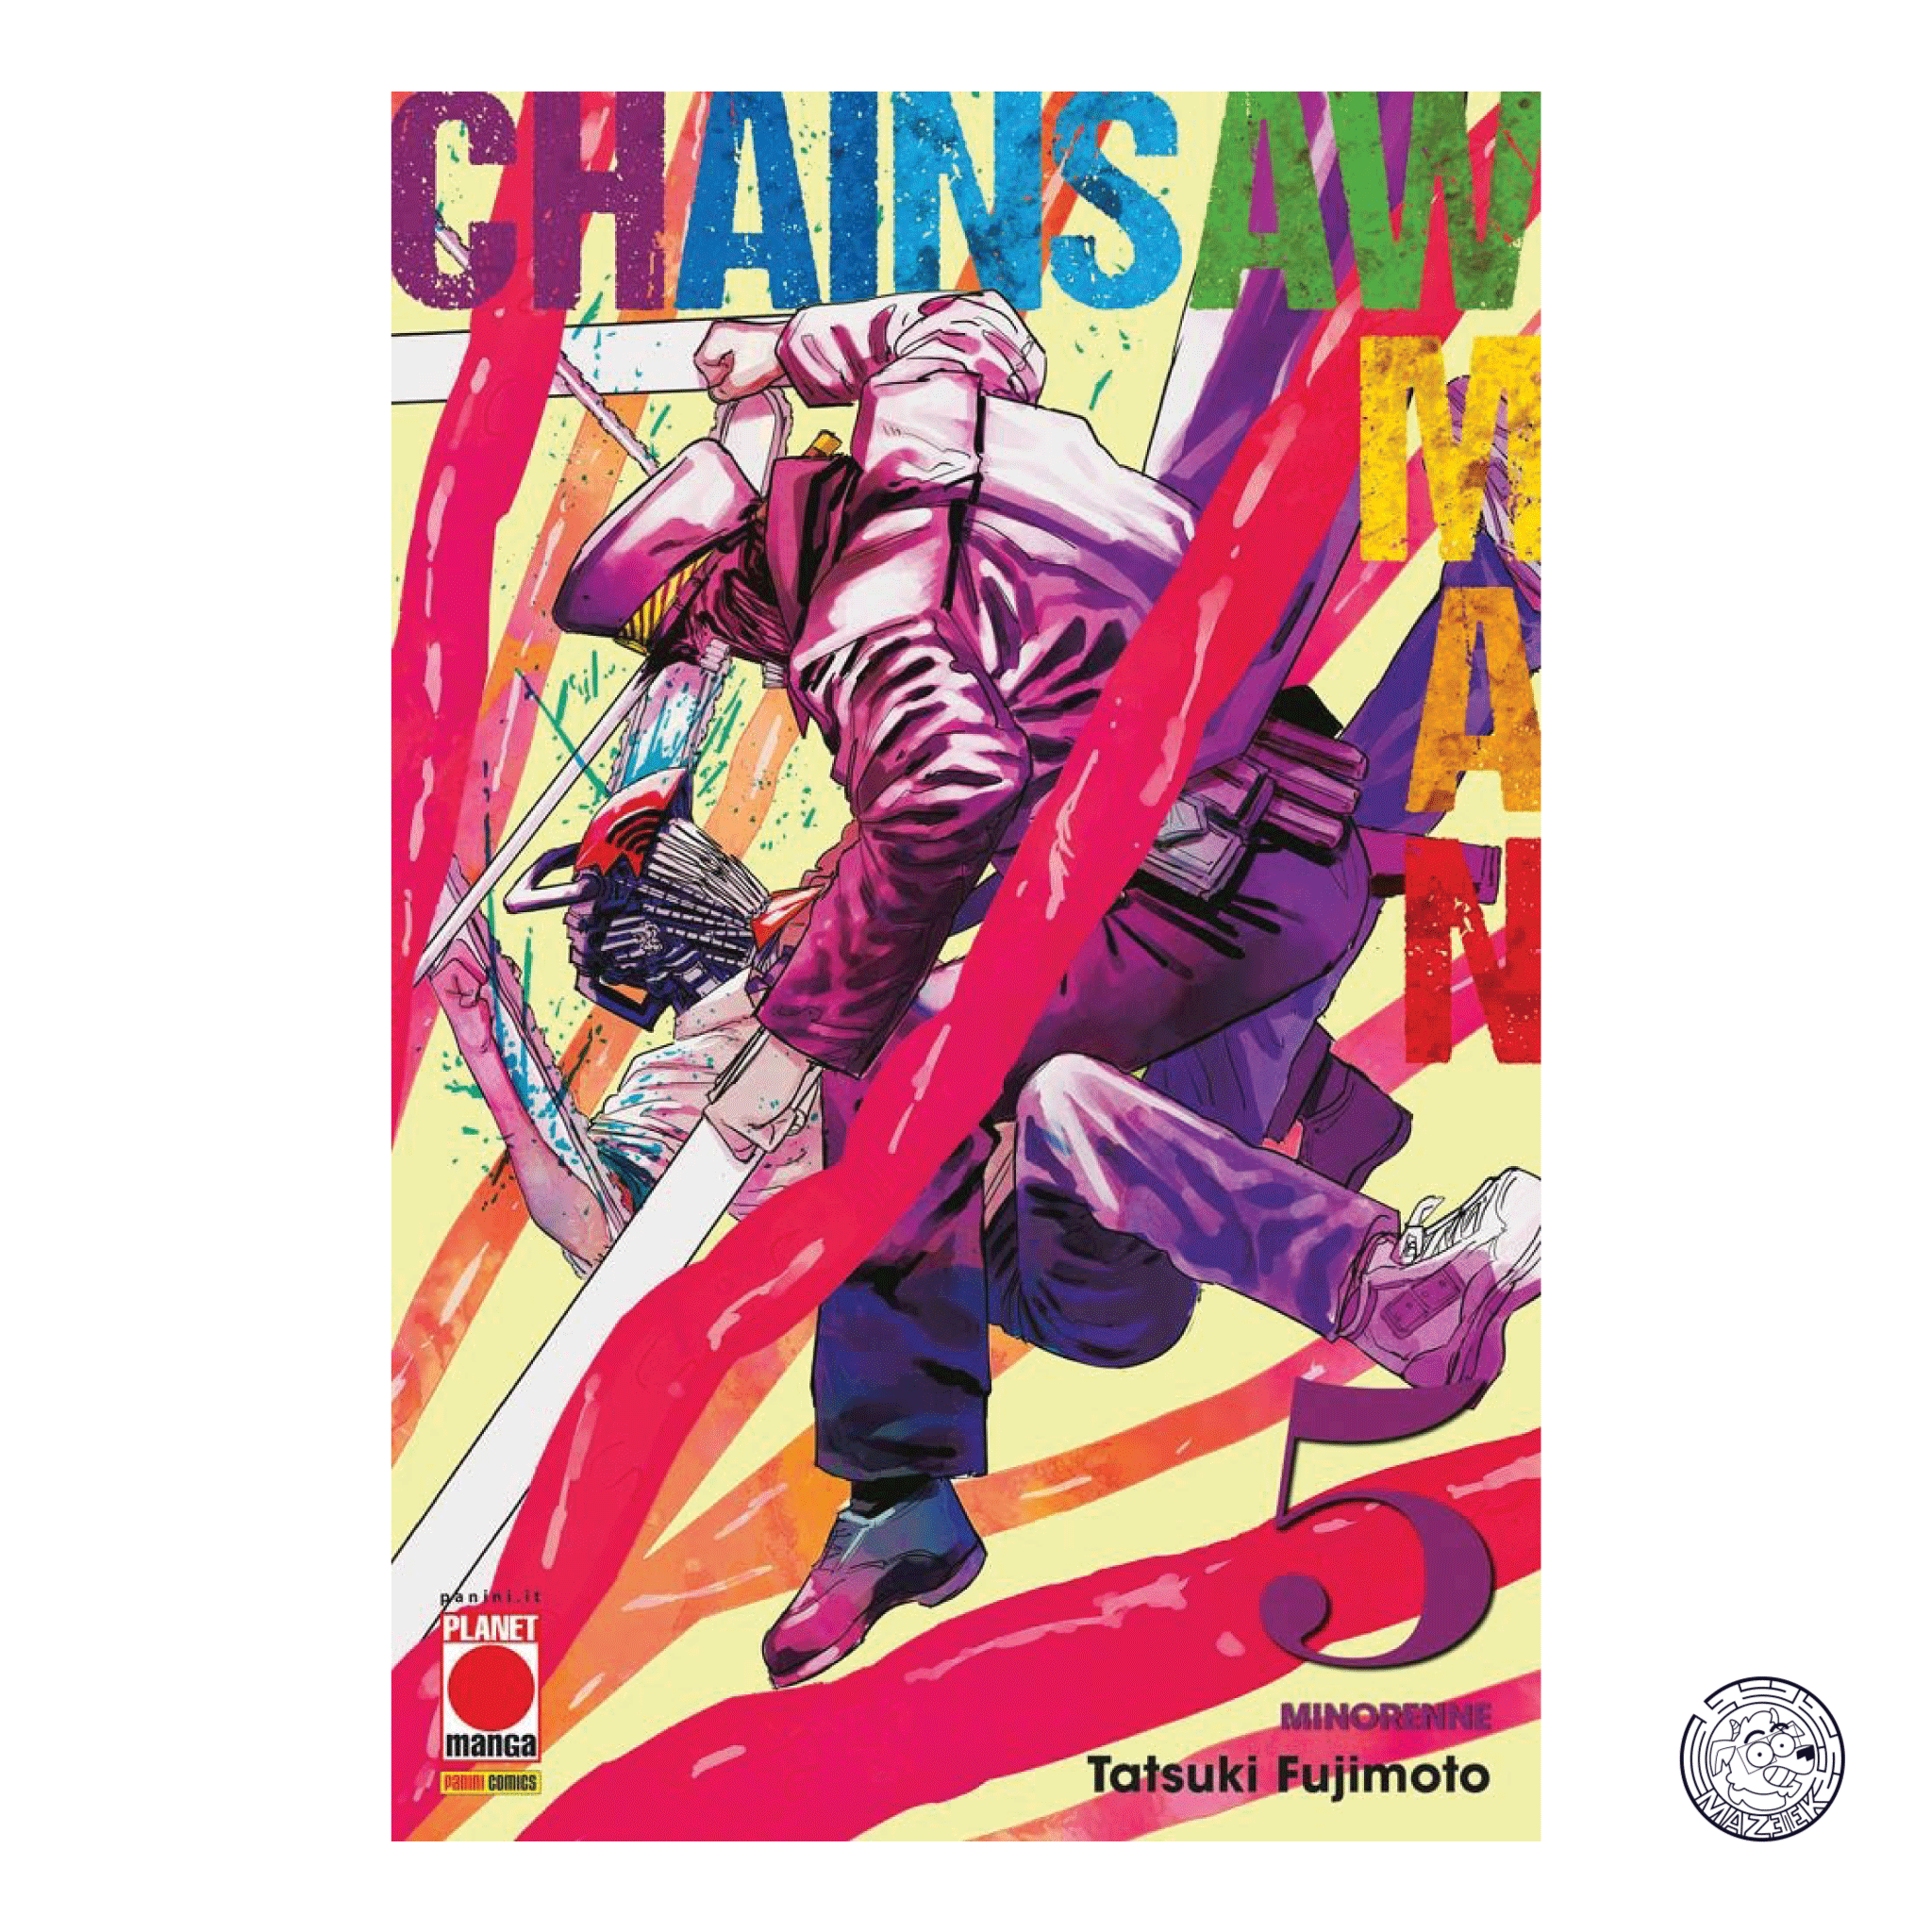 Chainsaw Man 05 - First Printing